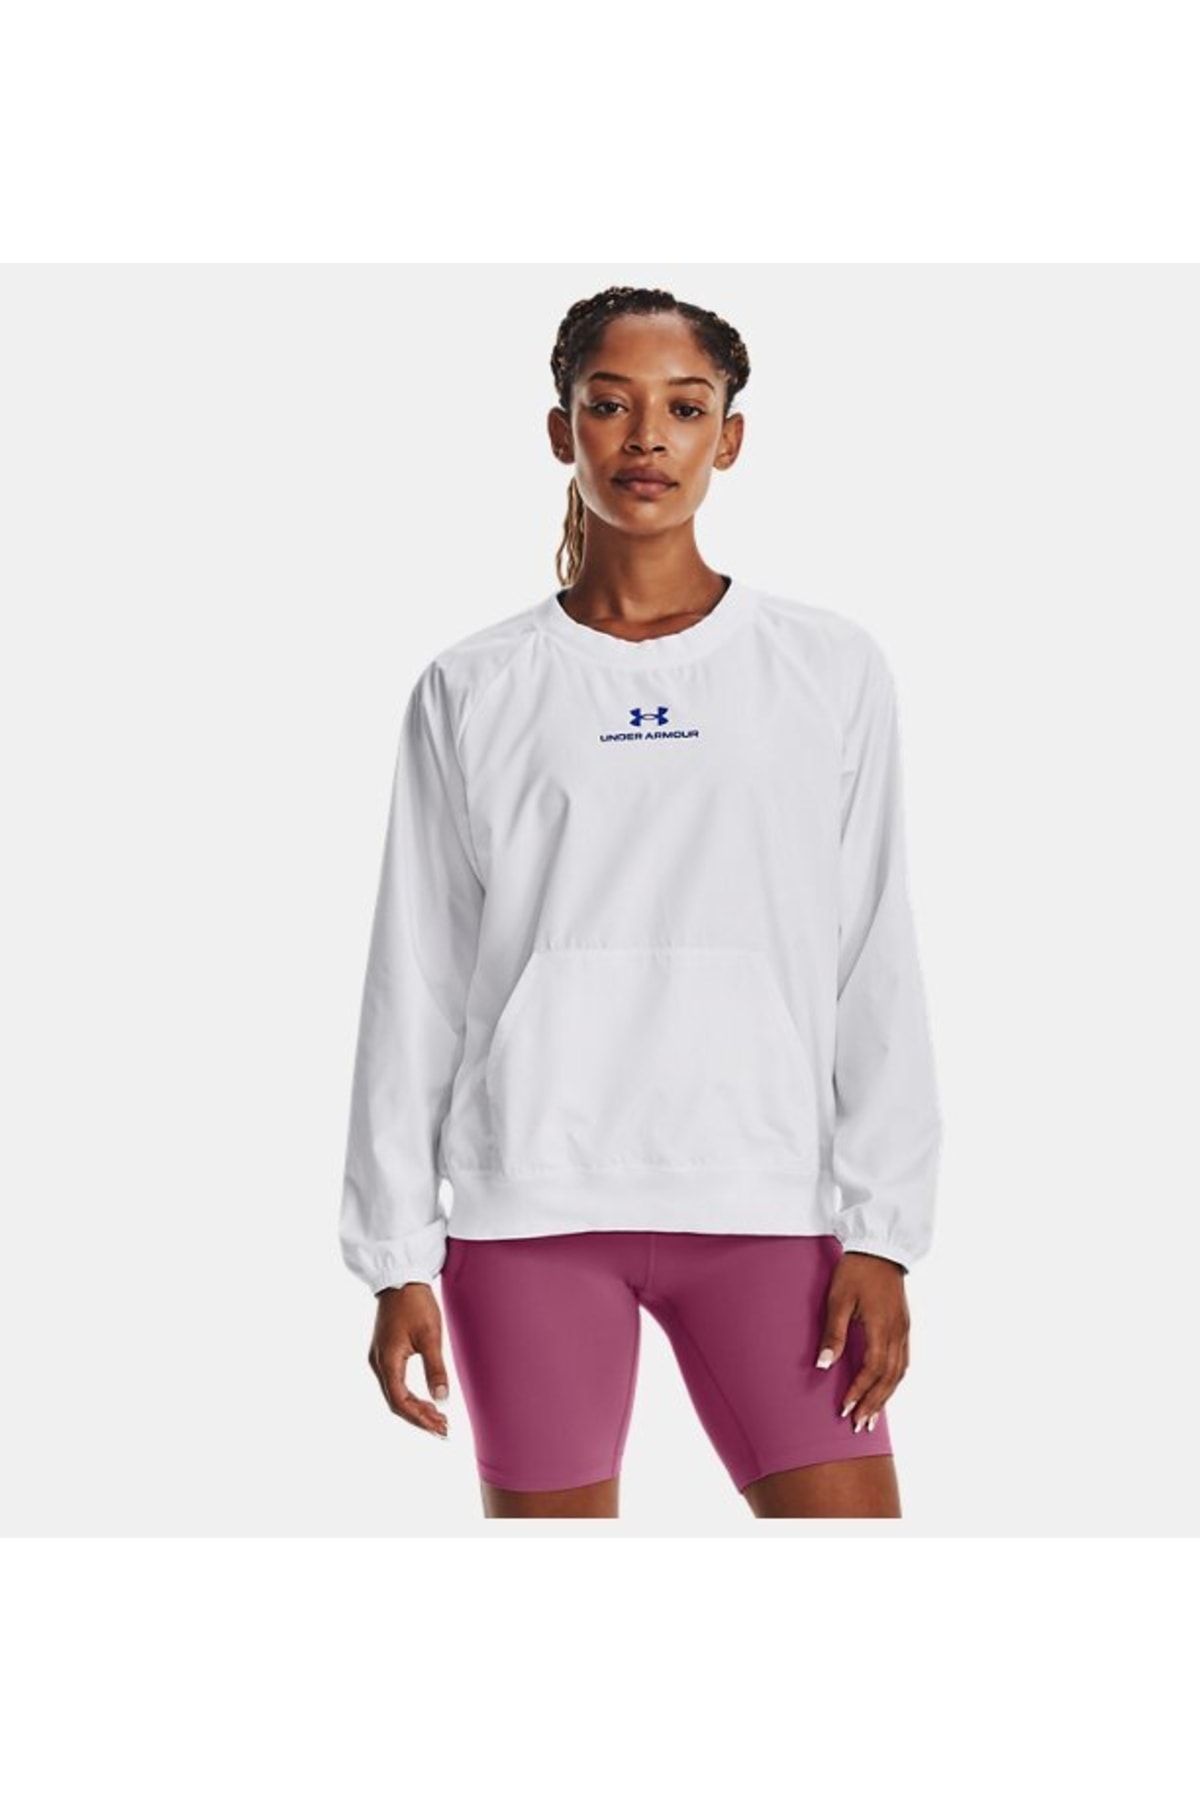 Under Armour Men's Sweatshirts  Athletic and Comfortable - Trendyol